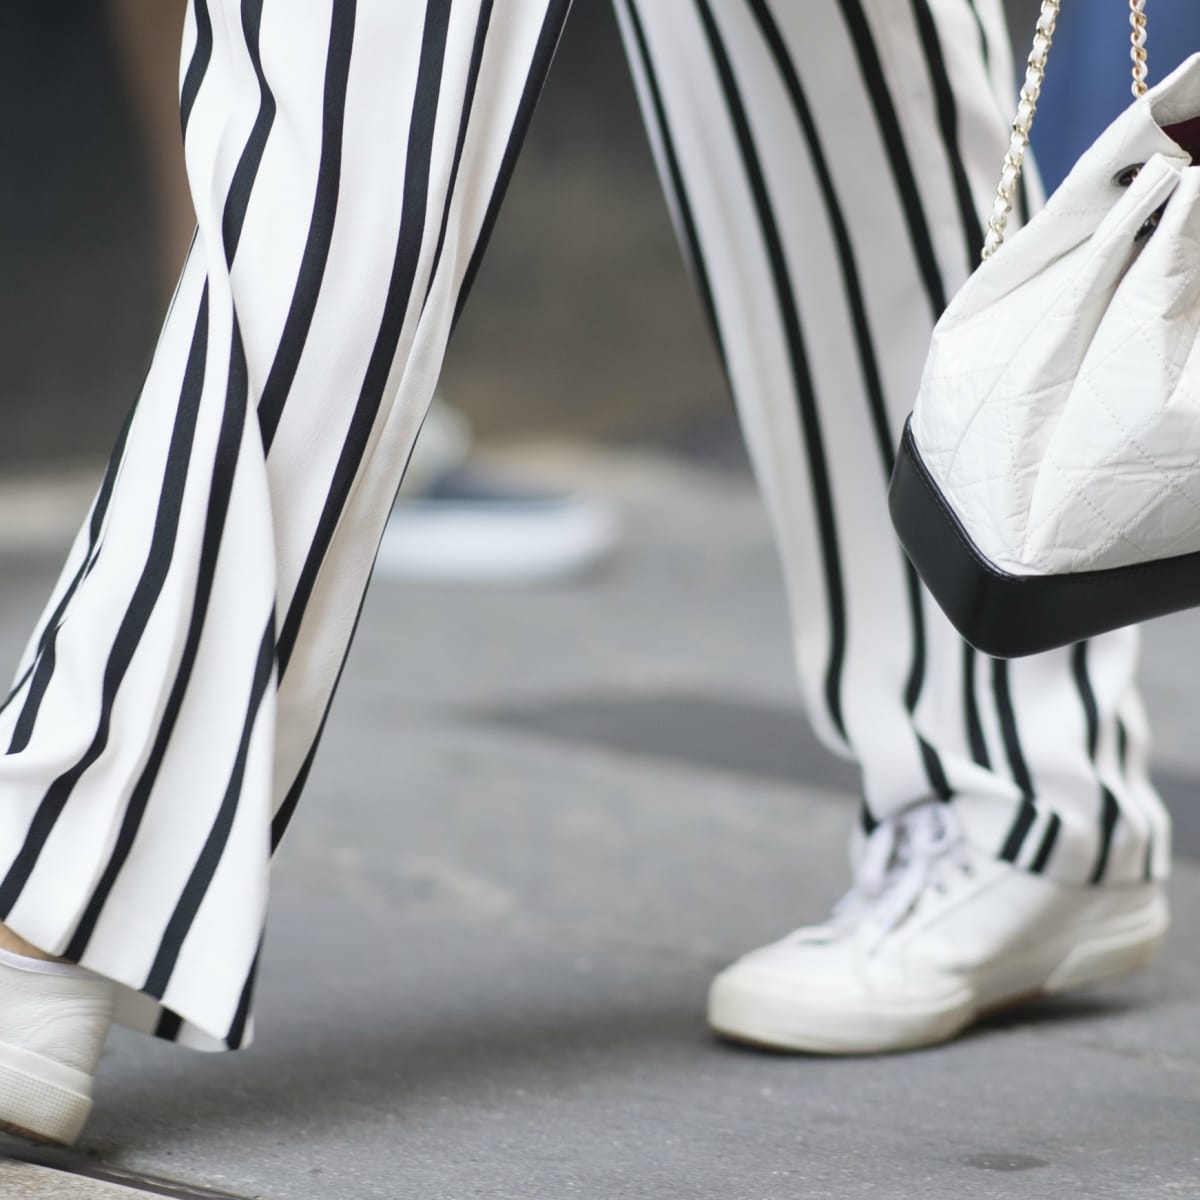 19 Squeaky-Clean White Tennis Shoes You Can Wear With Anything